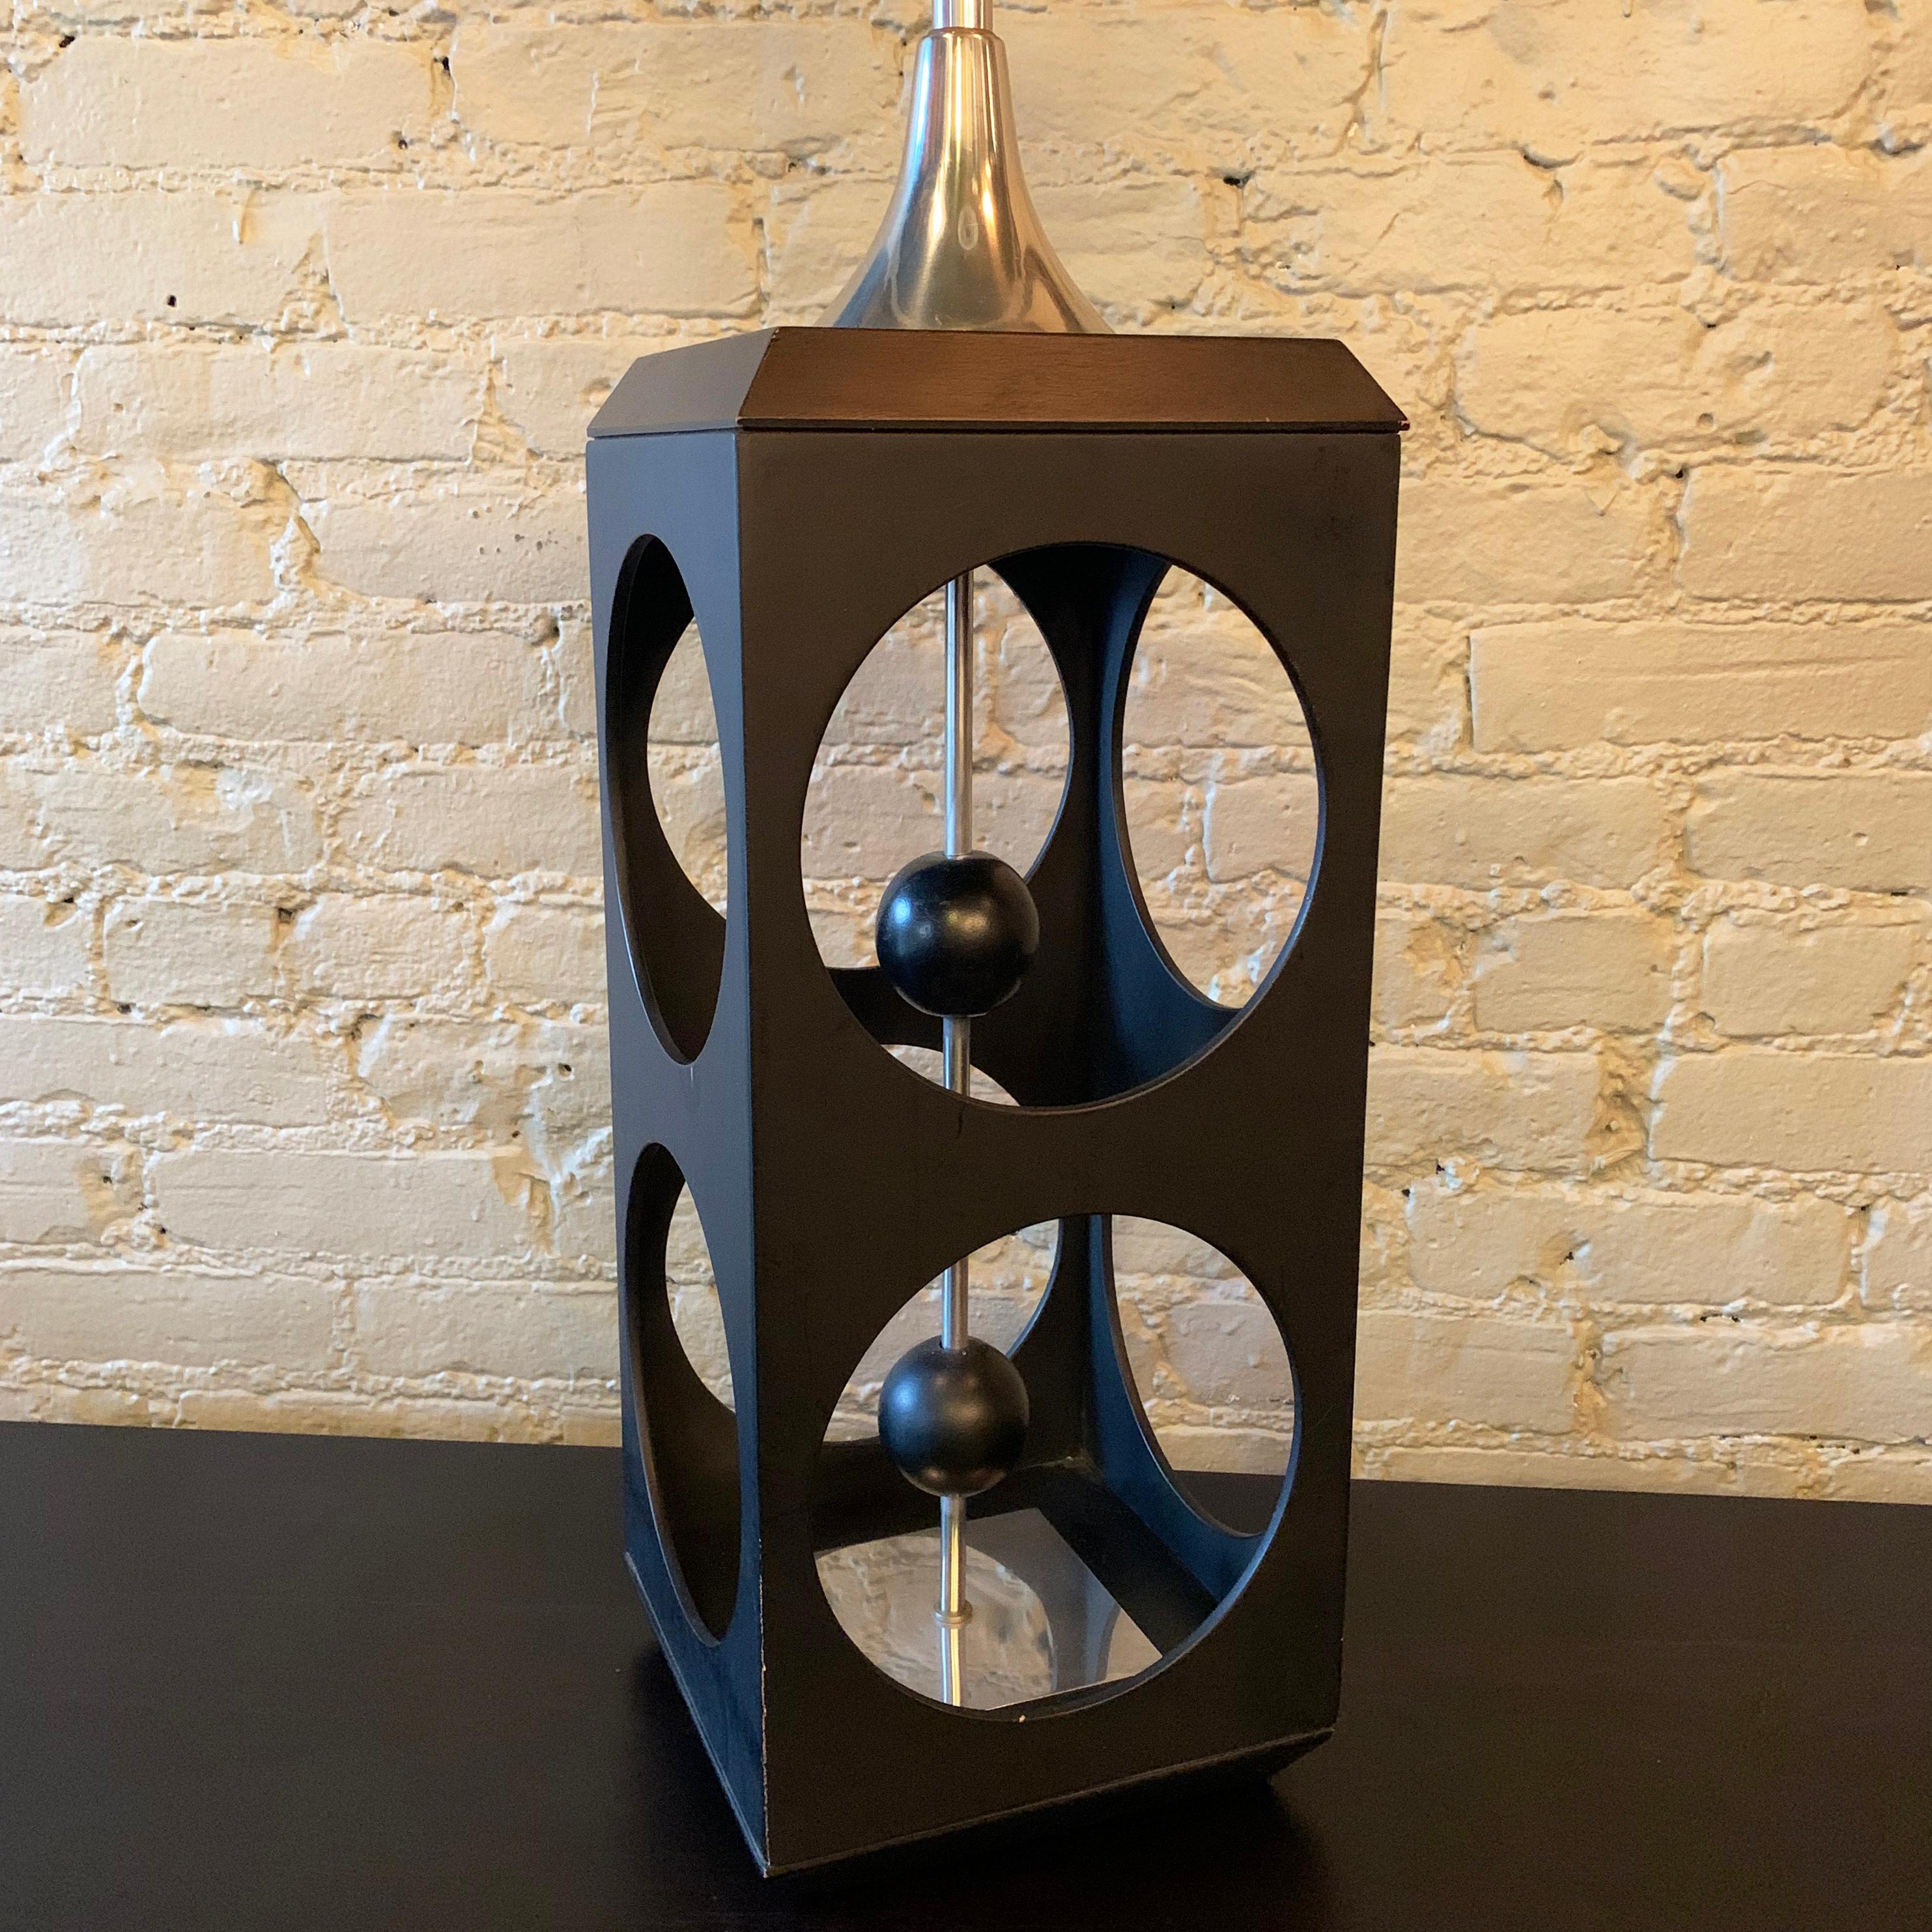 Large, Mid-Century Modern, black laminate wood, geometric, cube-shape, cut-out, table lamp features chrome hardware with a pull chain switch that runs along it's core. The height to the lamp's socket is 28 inches.